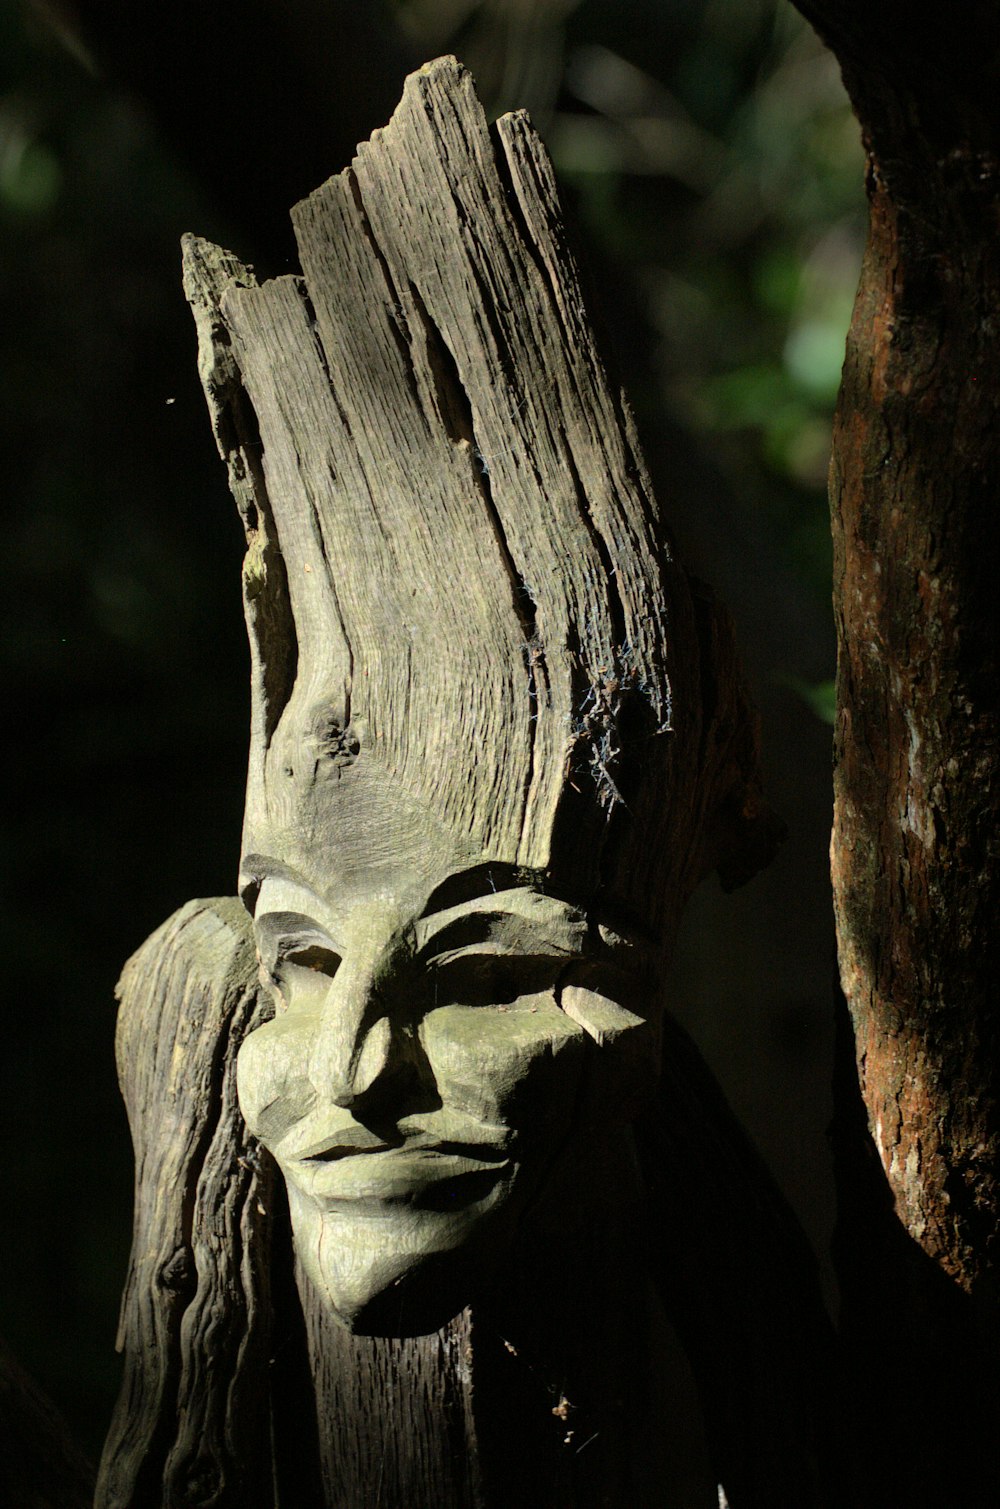 a wooden statue of a person with a face